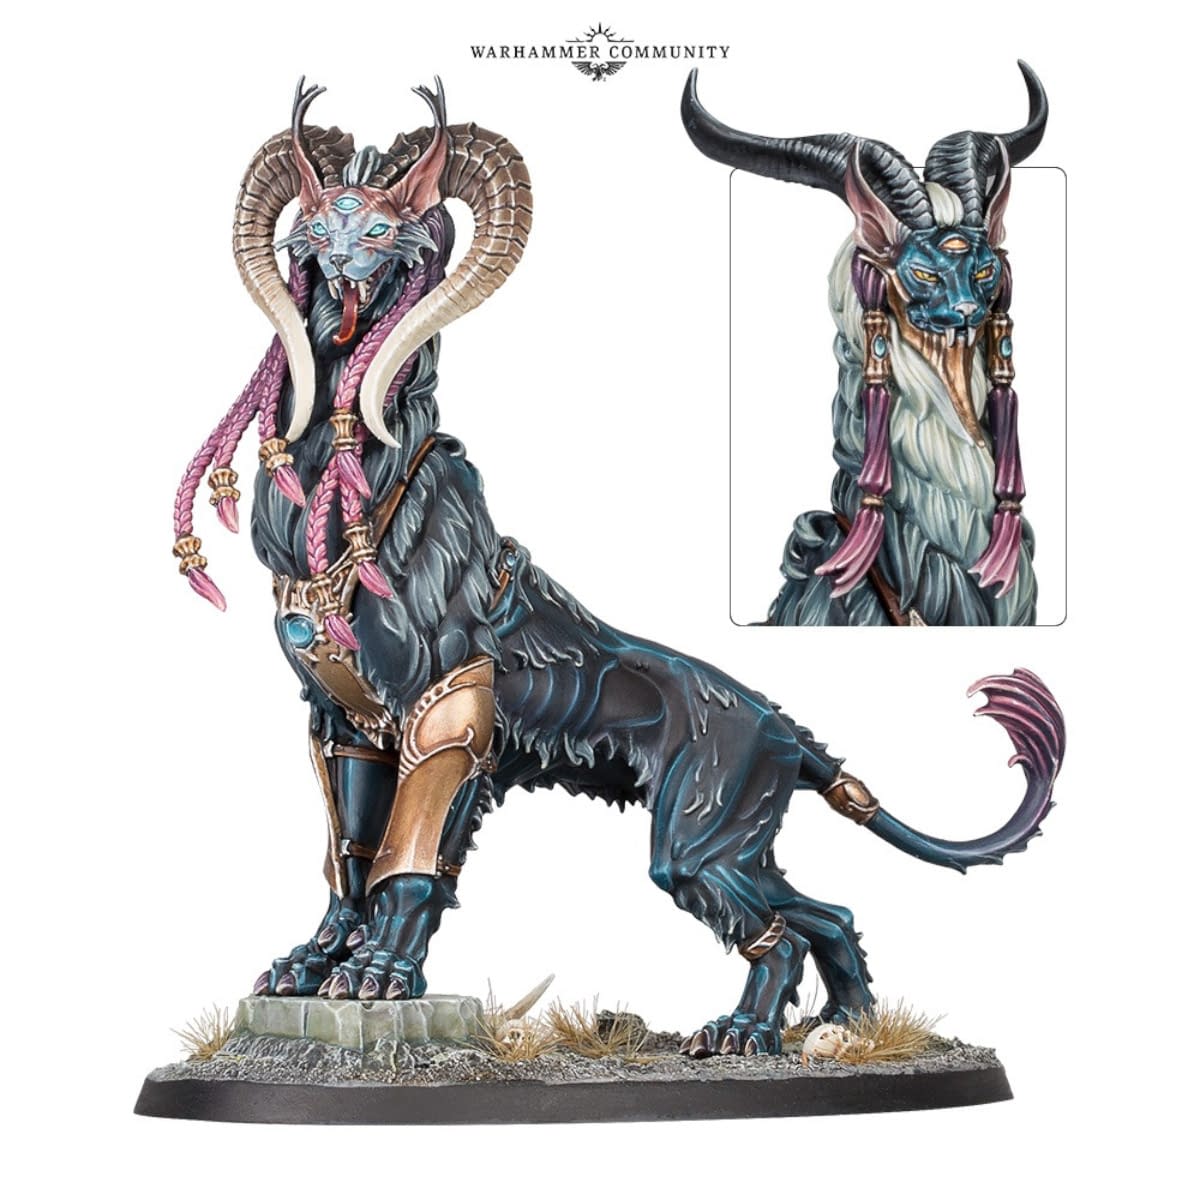 New Warcry Beasties Coming from Games Workshop